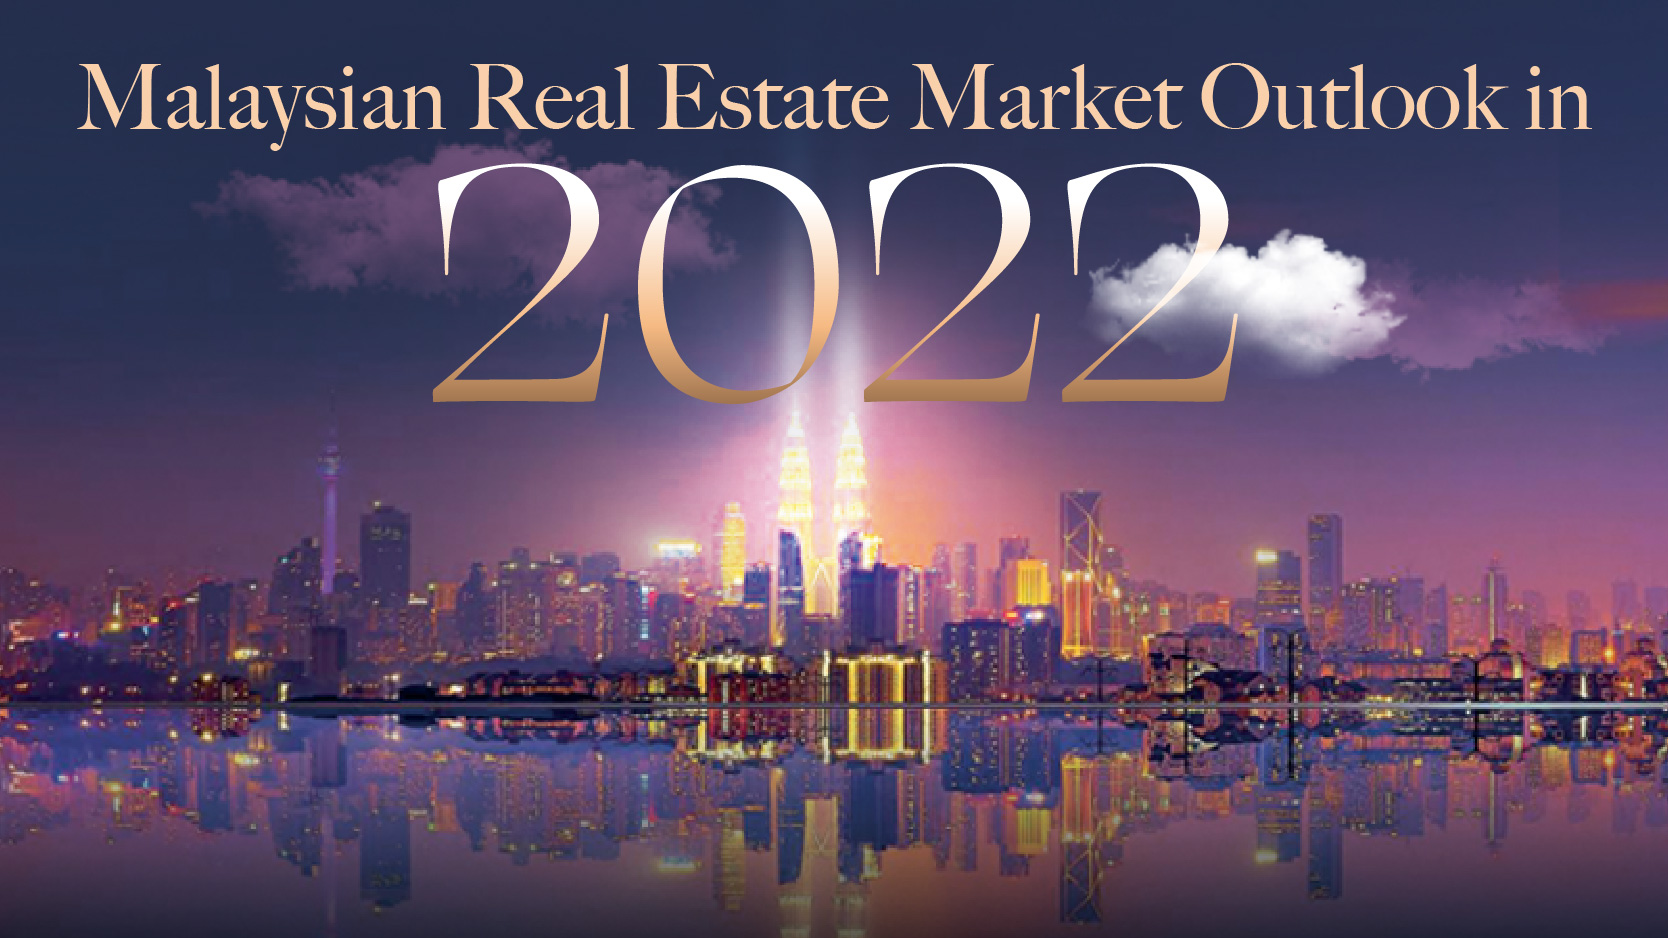 Malaysian Real Estate Market Outlook in 2022